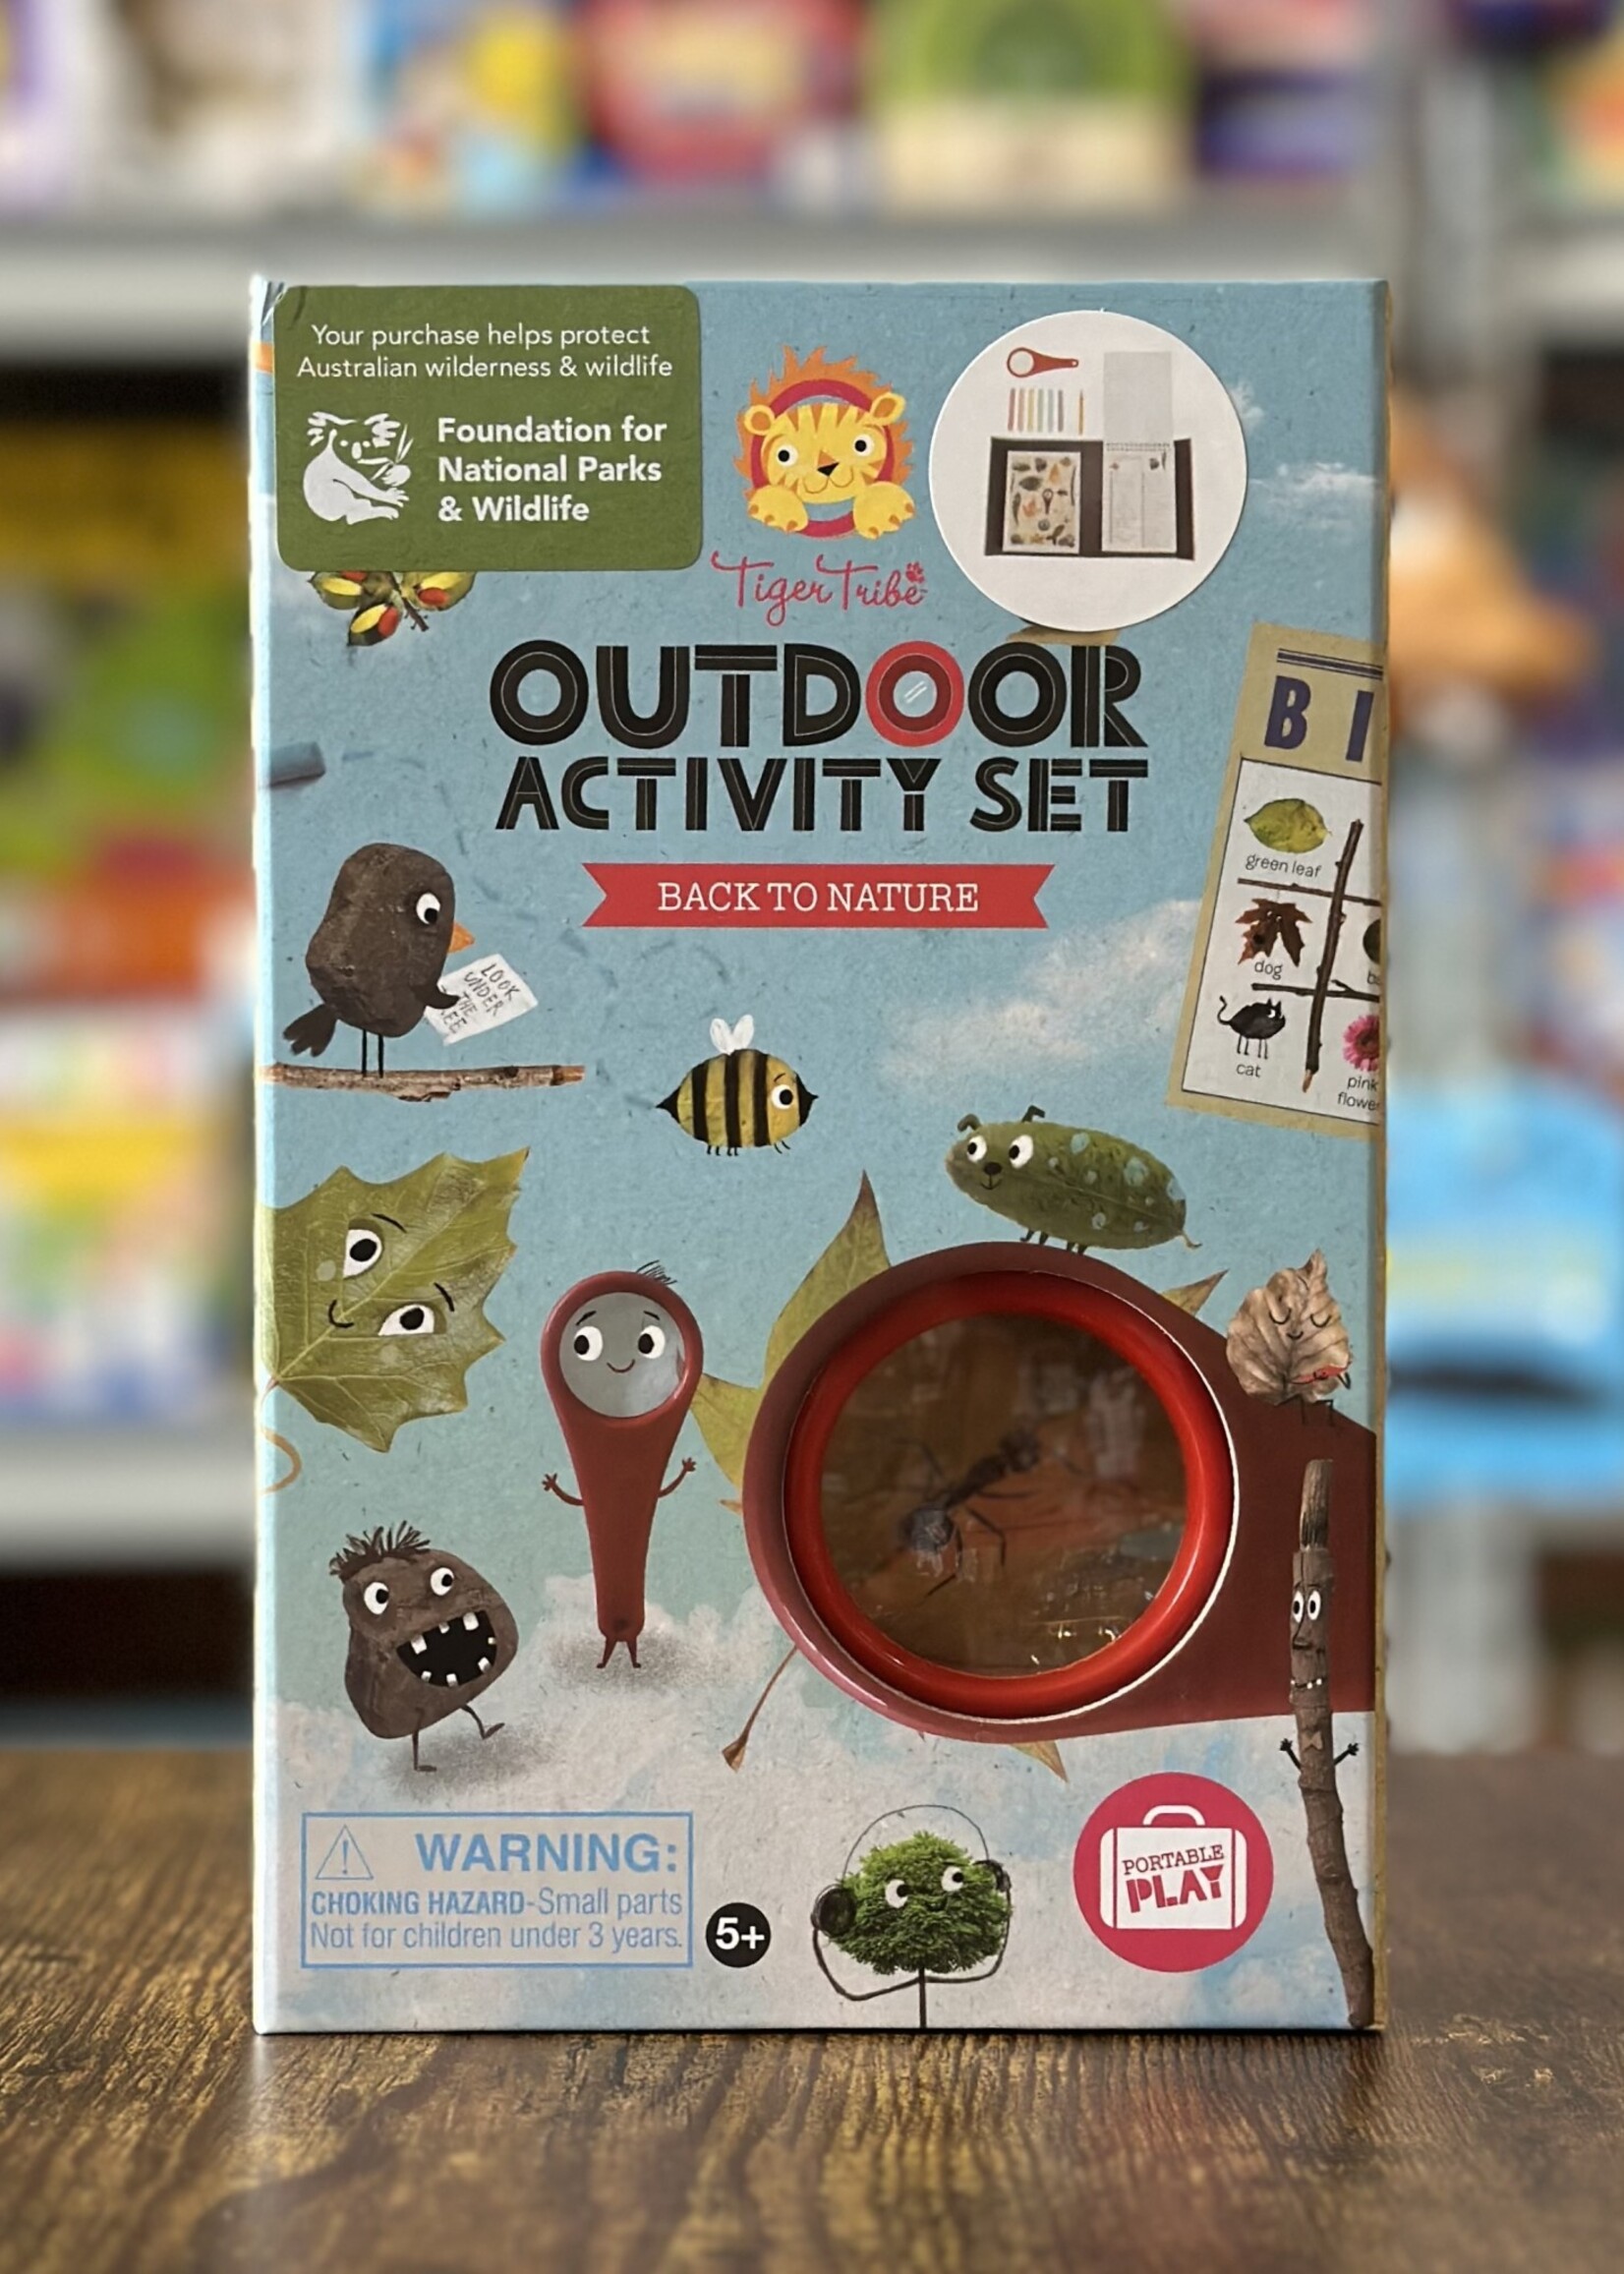 Tiger Tribe Outdoor Activity Set - Back to Nature